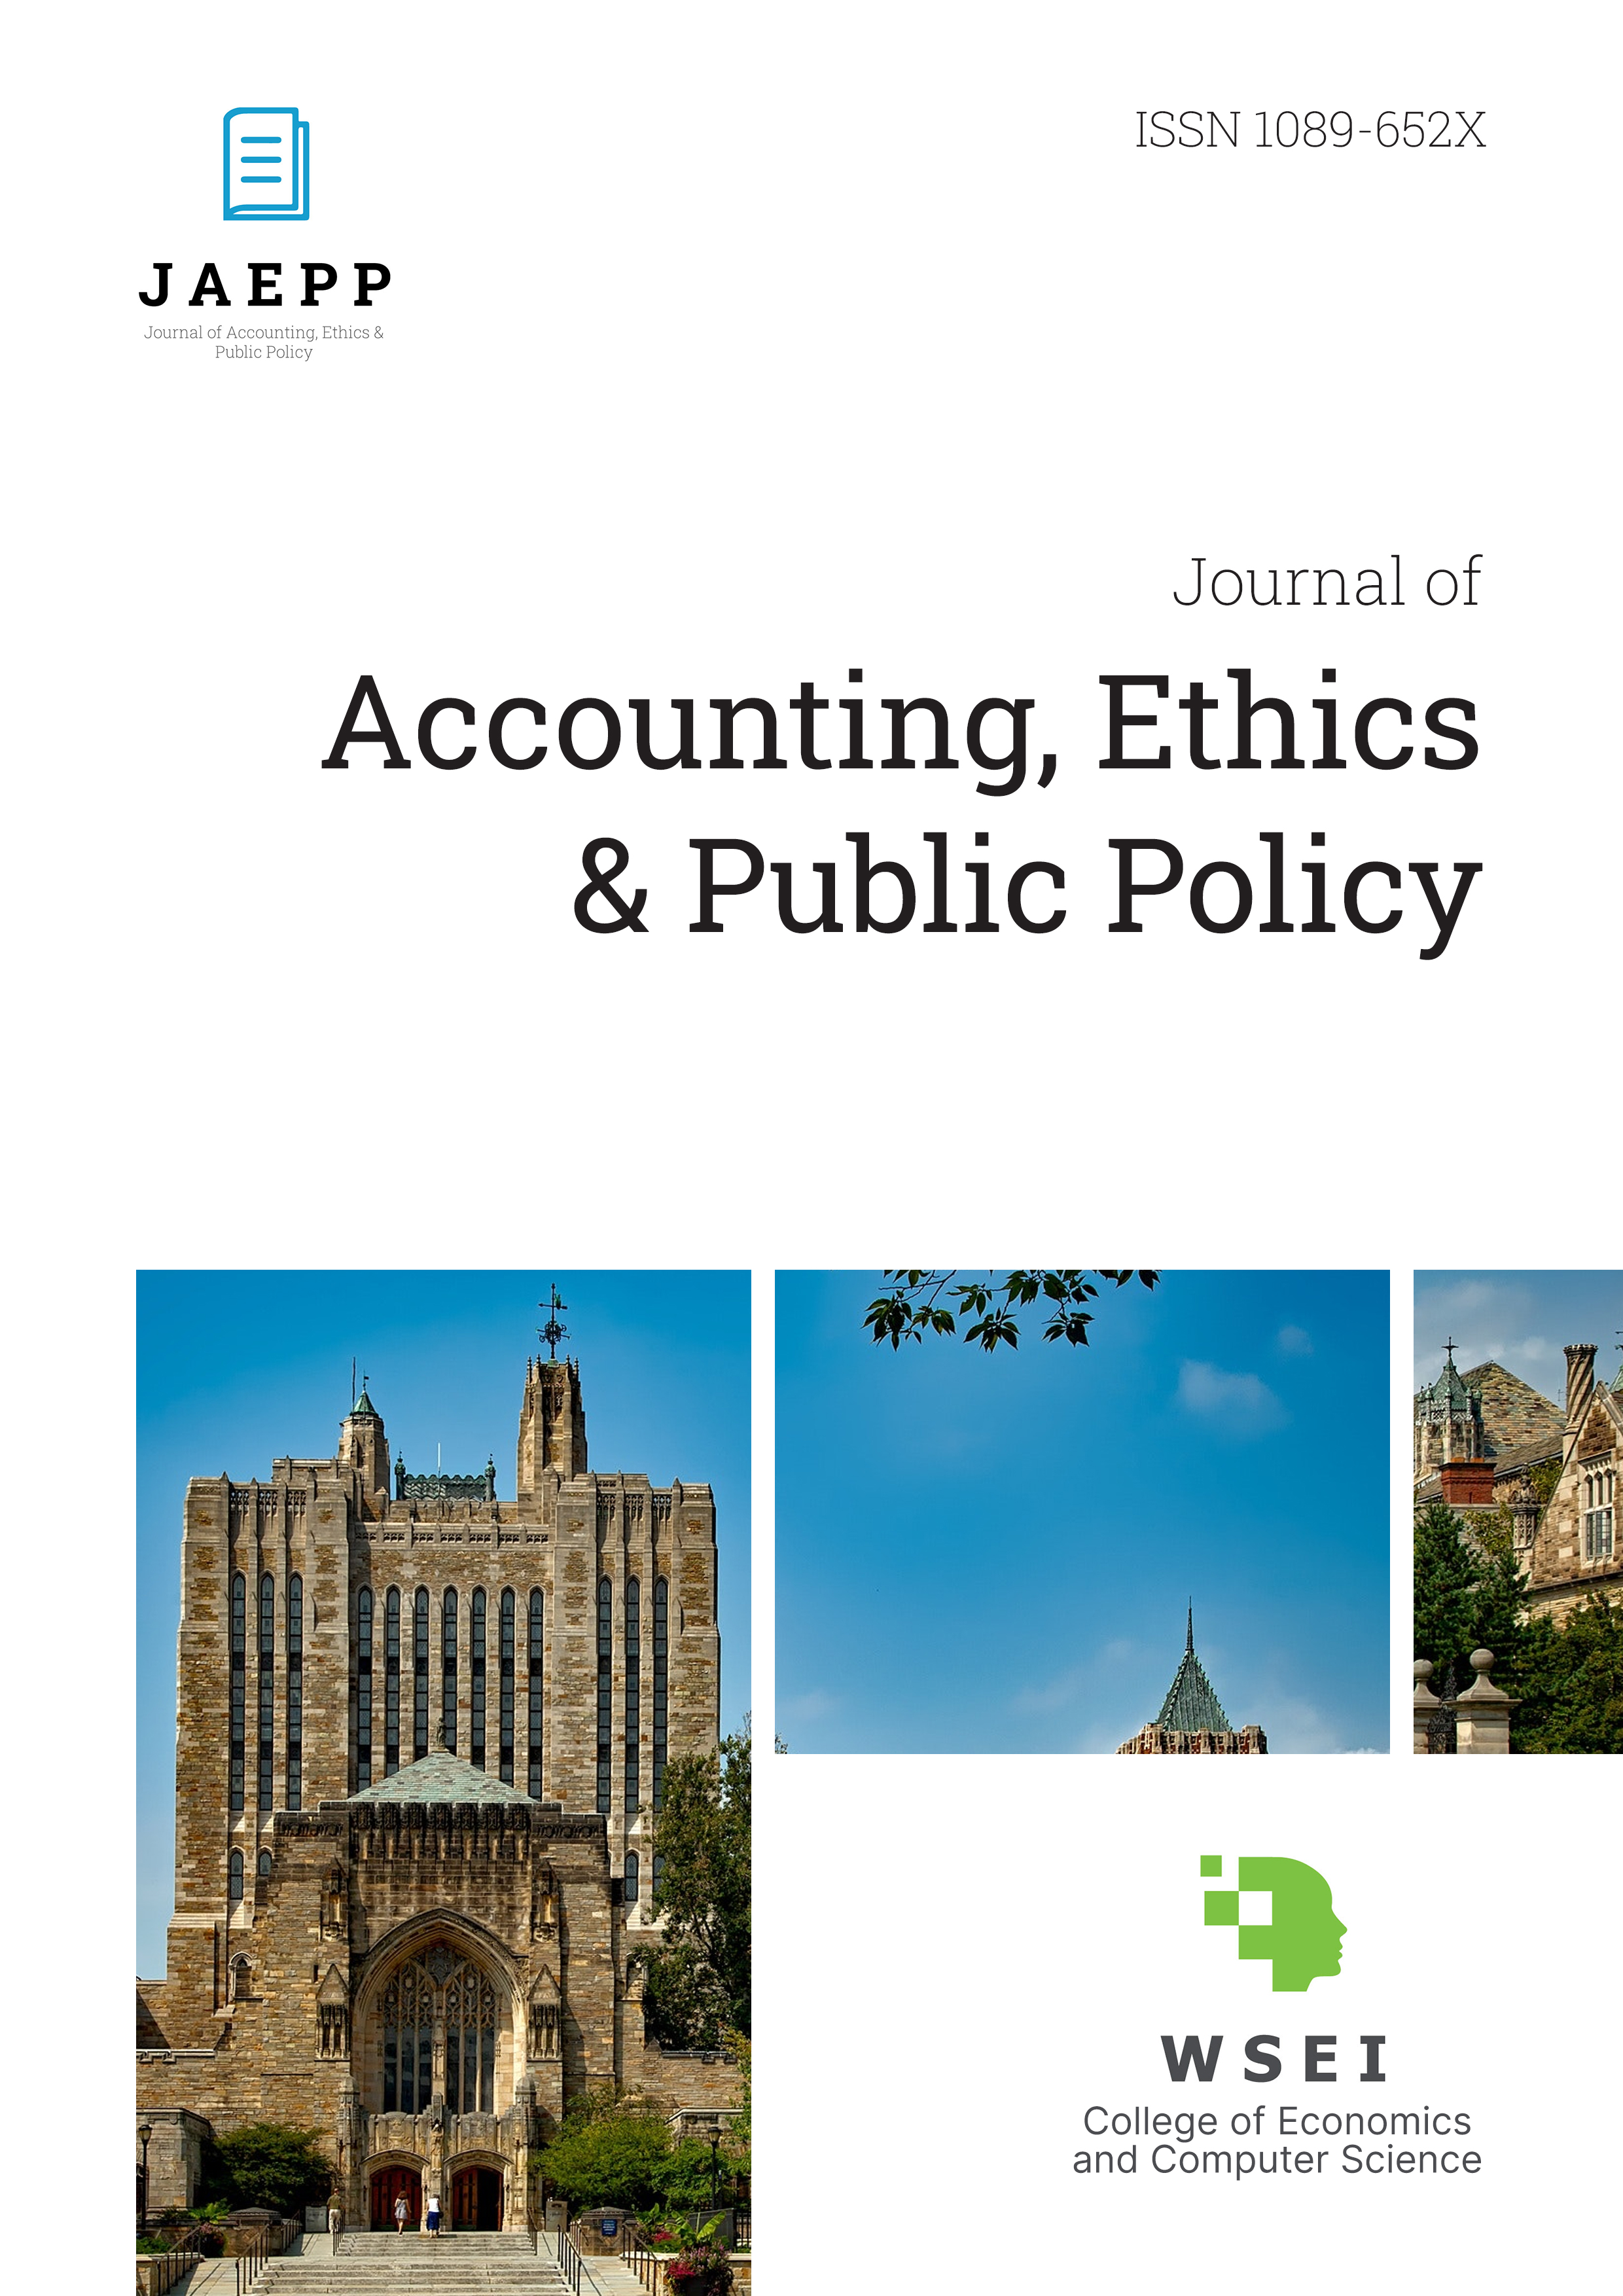 					View Vol. 22 No. 4 (2021): Journal of Accounting, Ethics & Public Policy, JAEPP
				